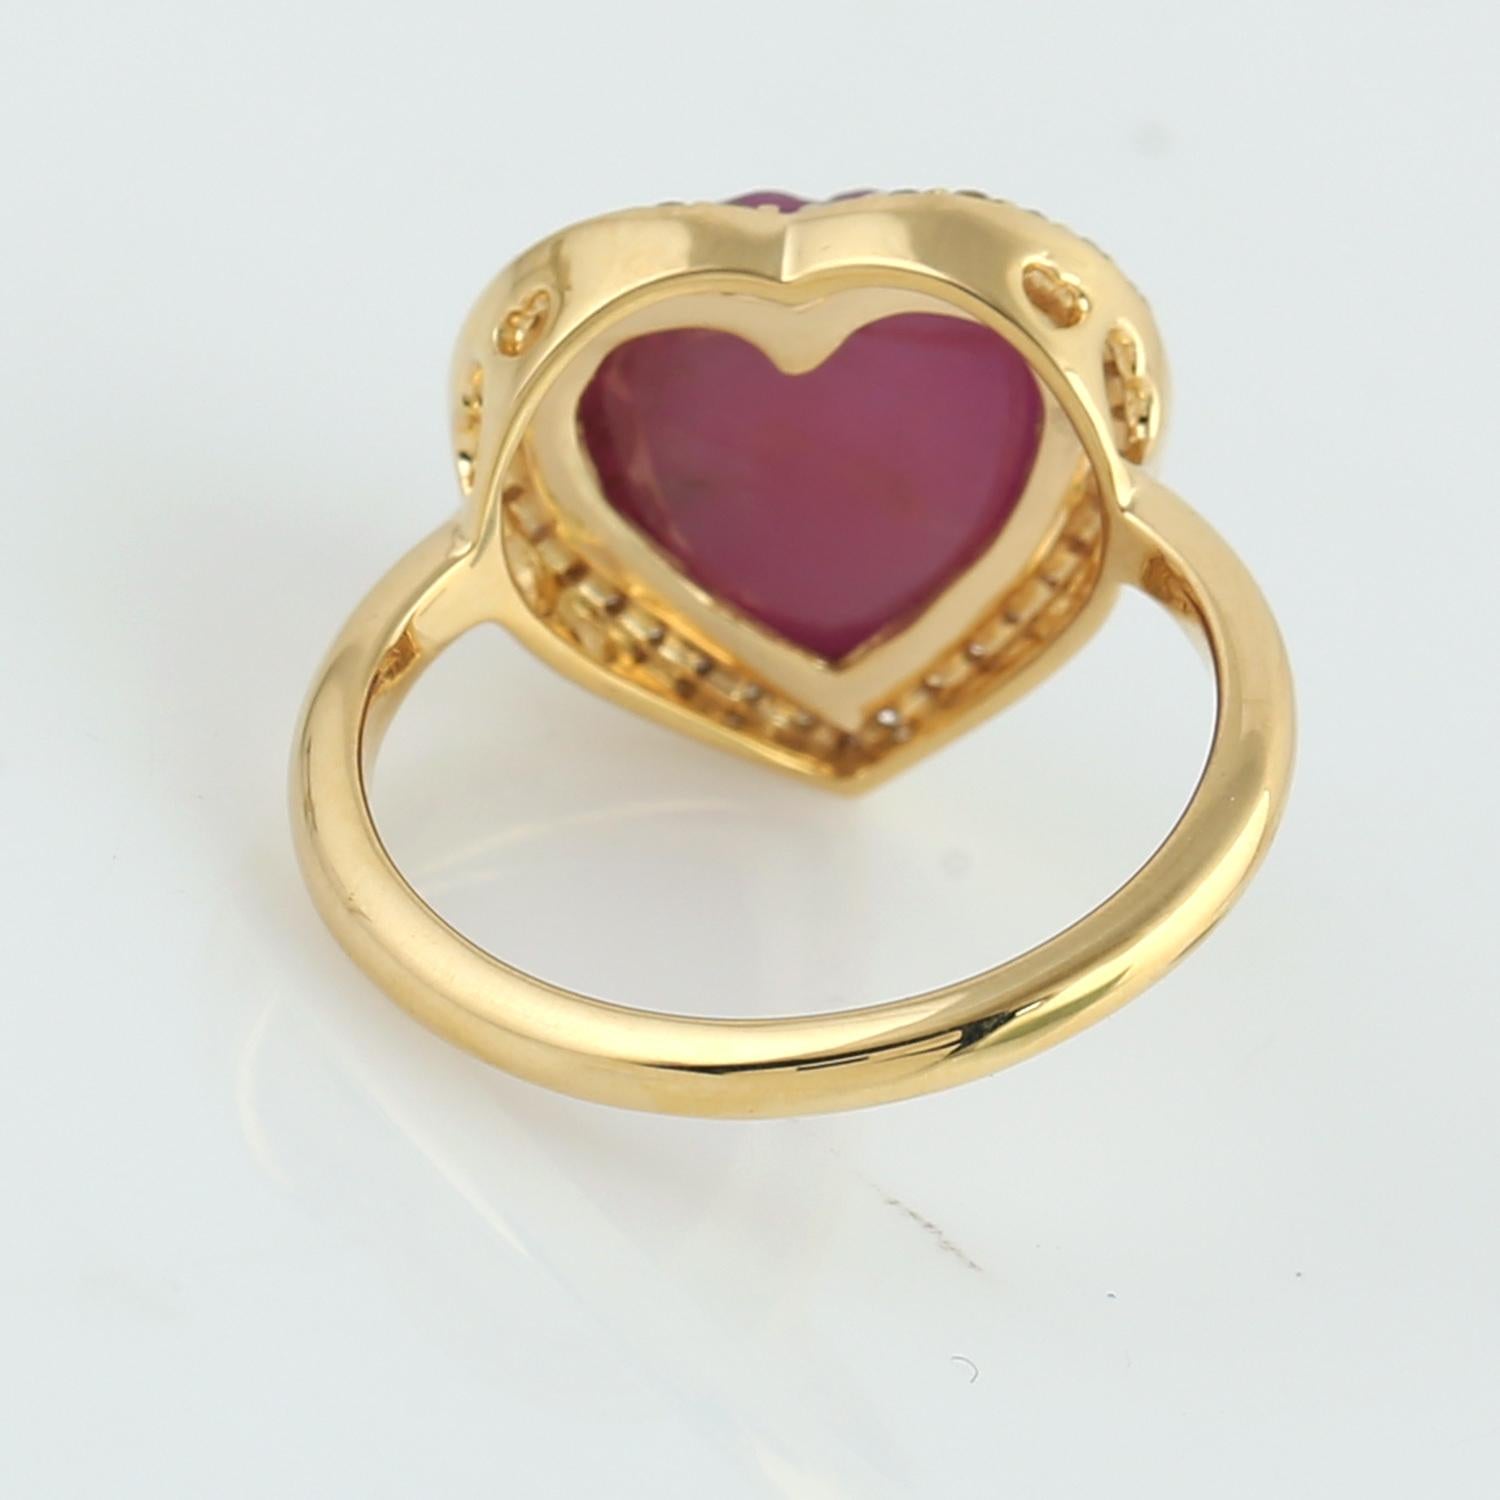 Mixed Cut 6.41 Ct Heart Shaped Pink Sapphire Cocktail Ring With Diamonds In 18k Gold For Sale